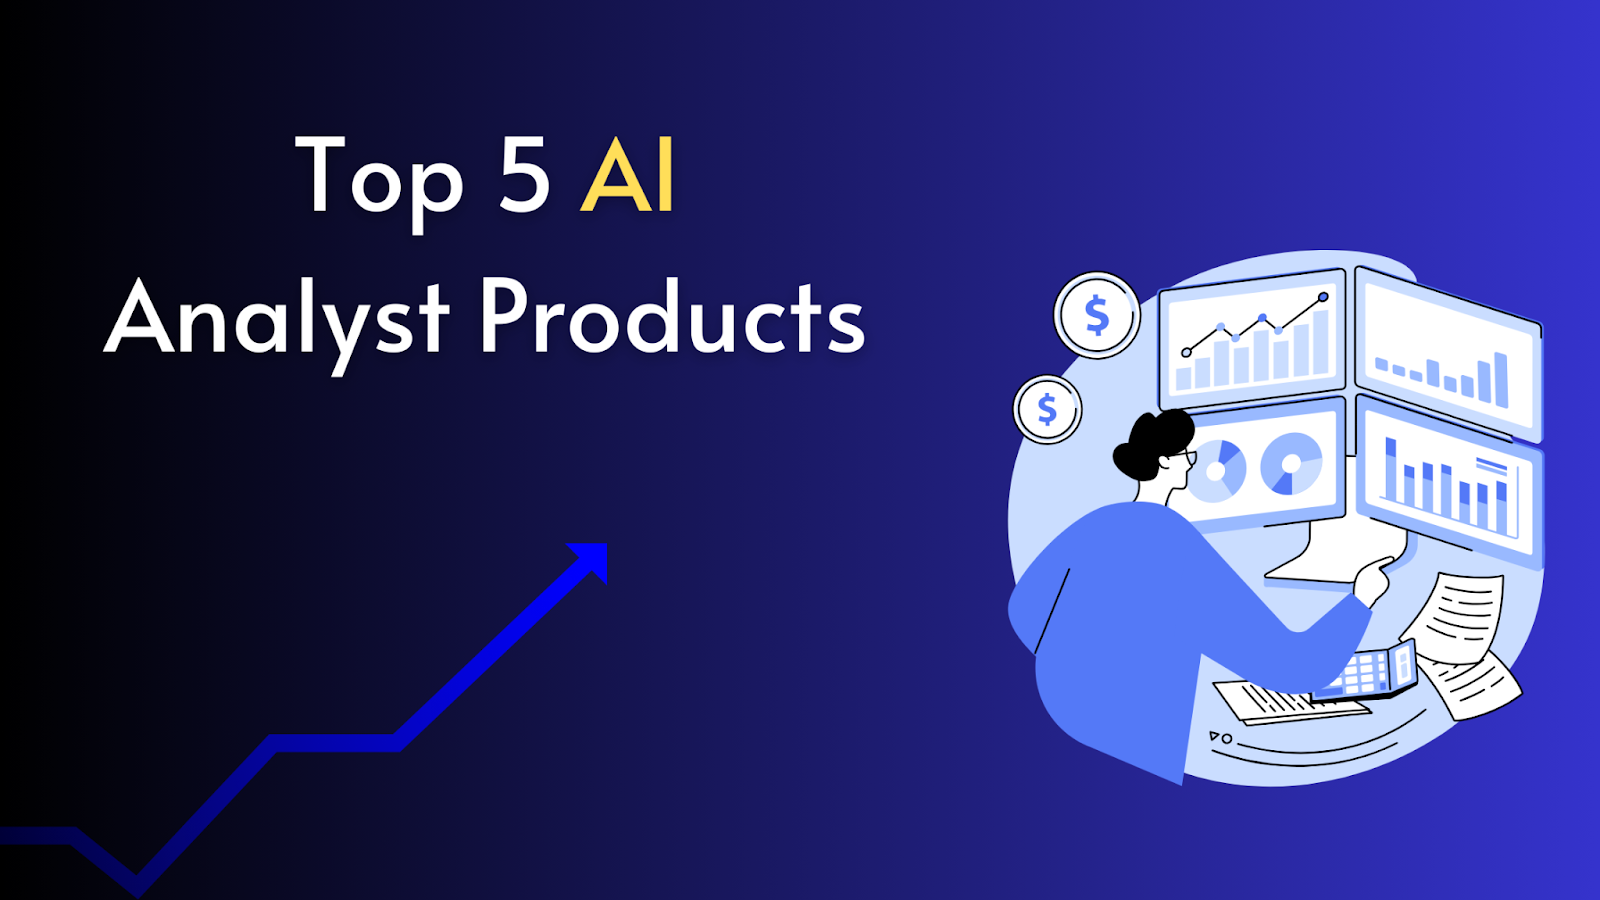 Top 5 AI Analyst Products